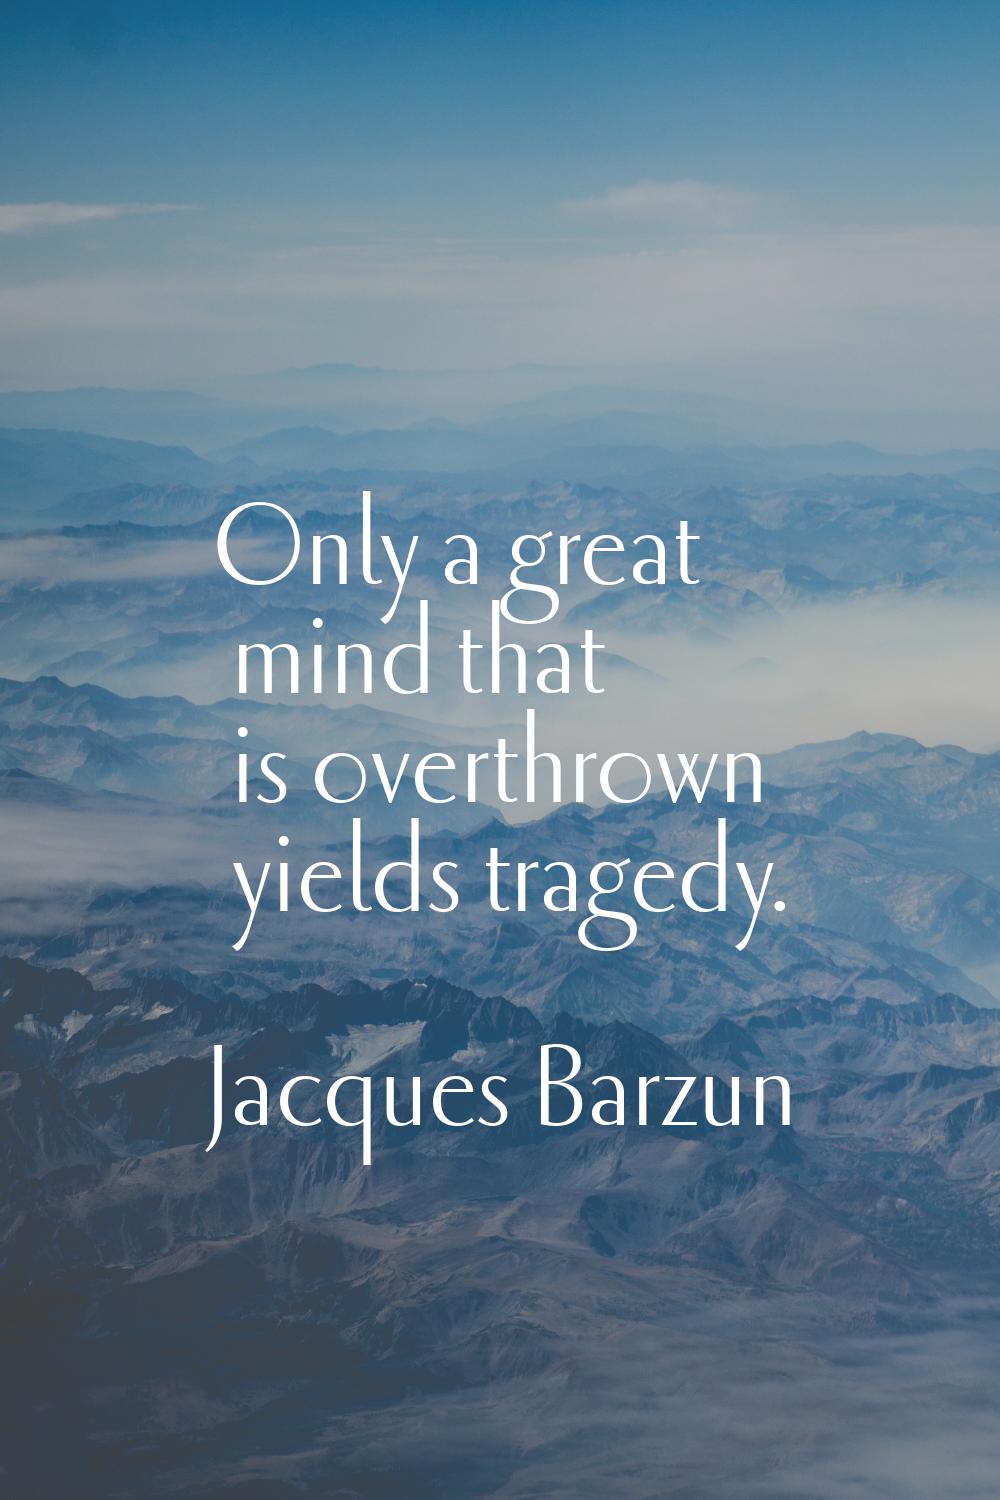 Only a great mind that is overthrown yields tragedy.